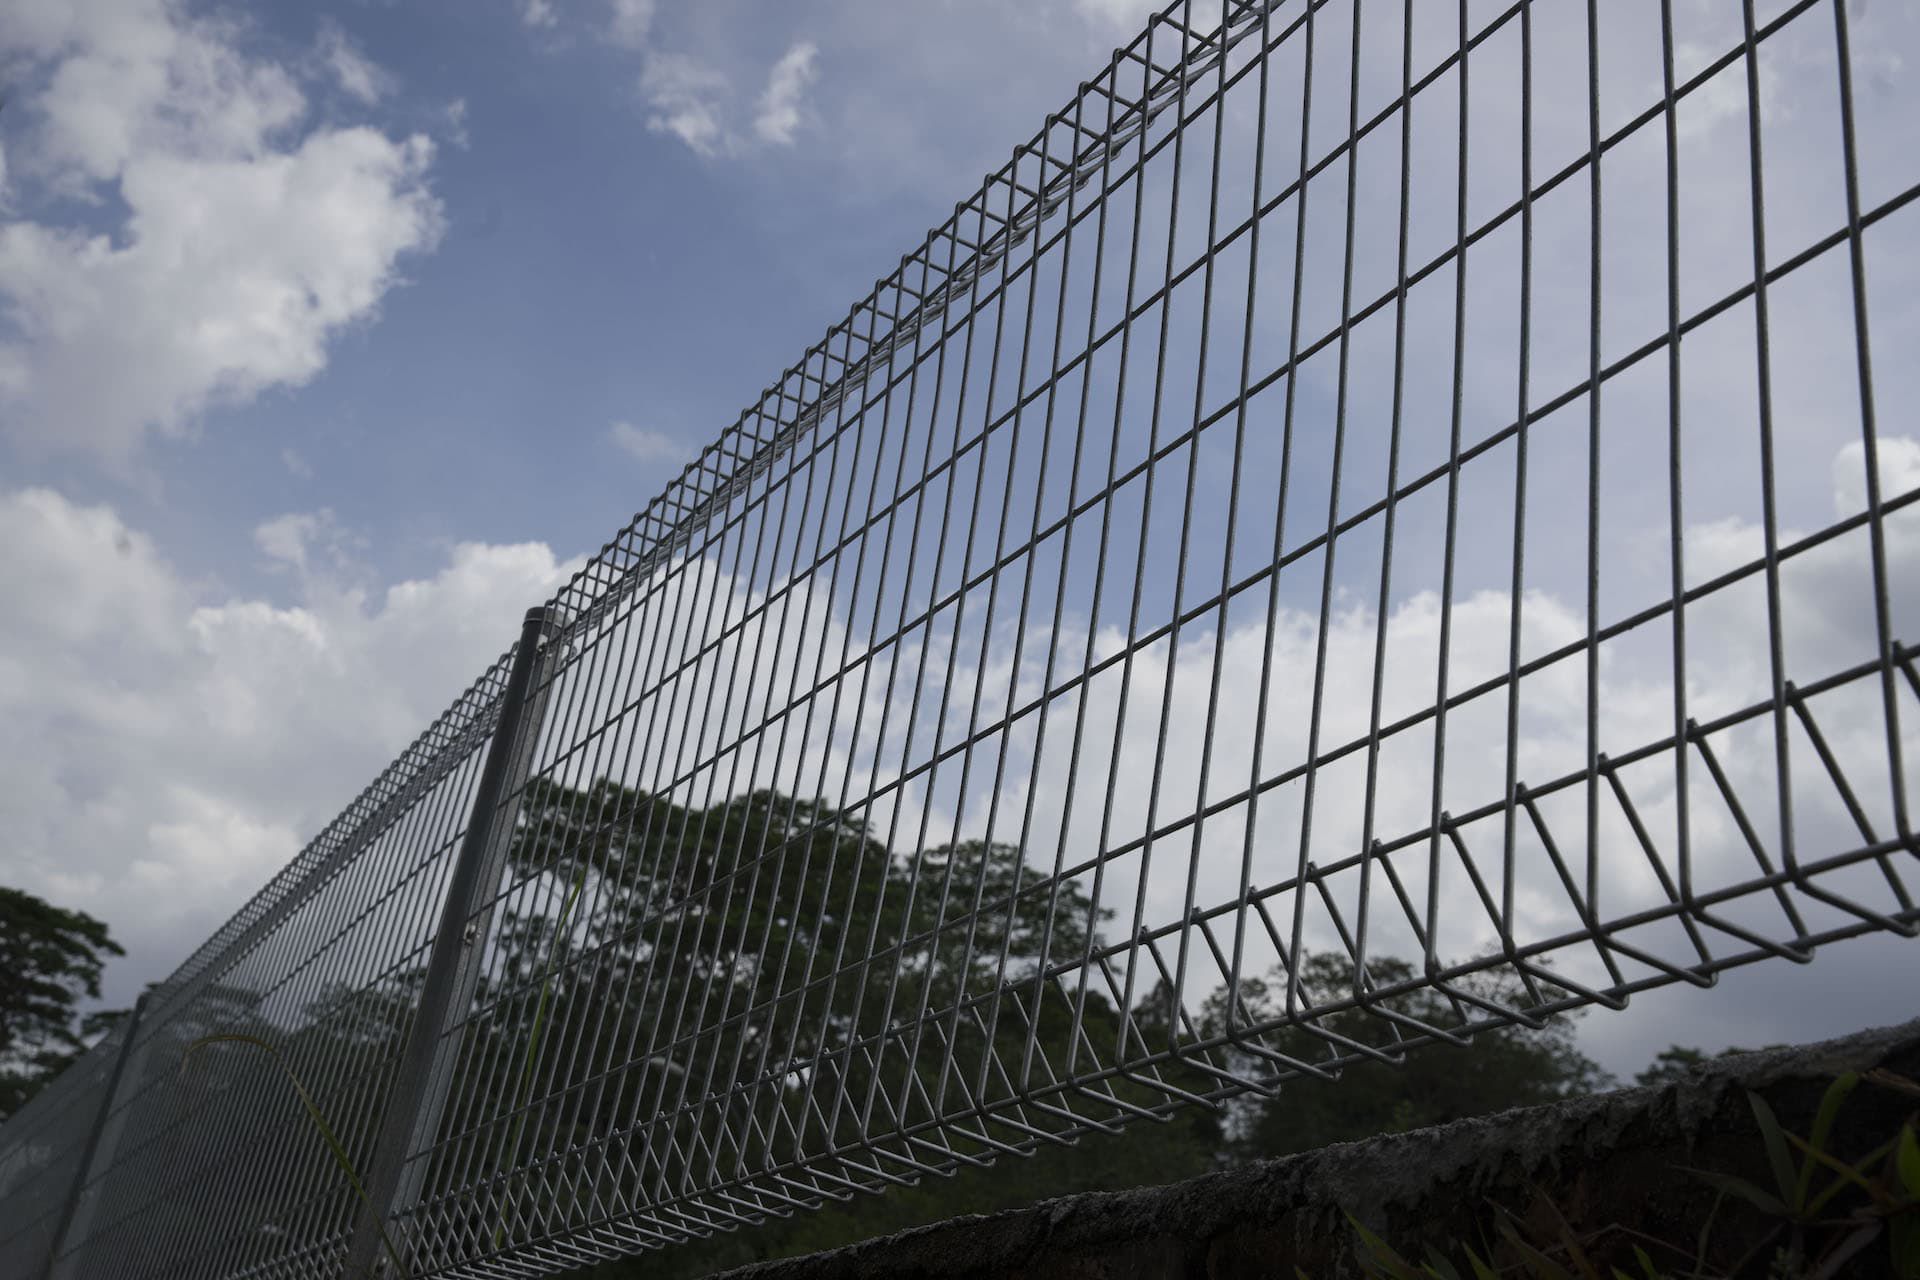 Types Of Mesh Wire Fencing - Design Talk